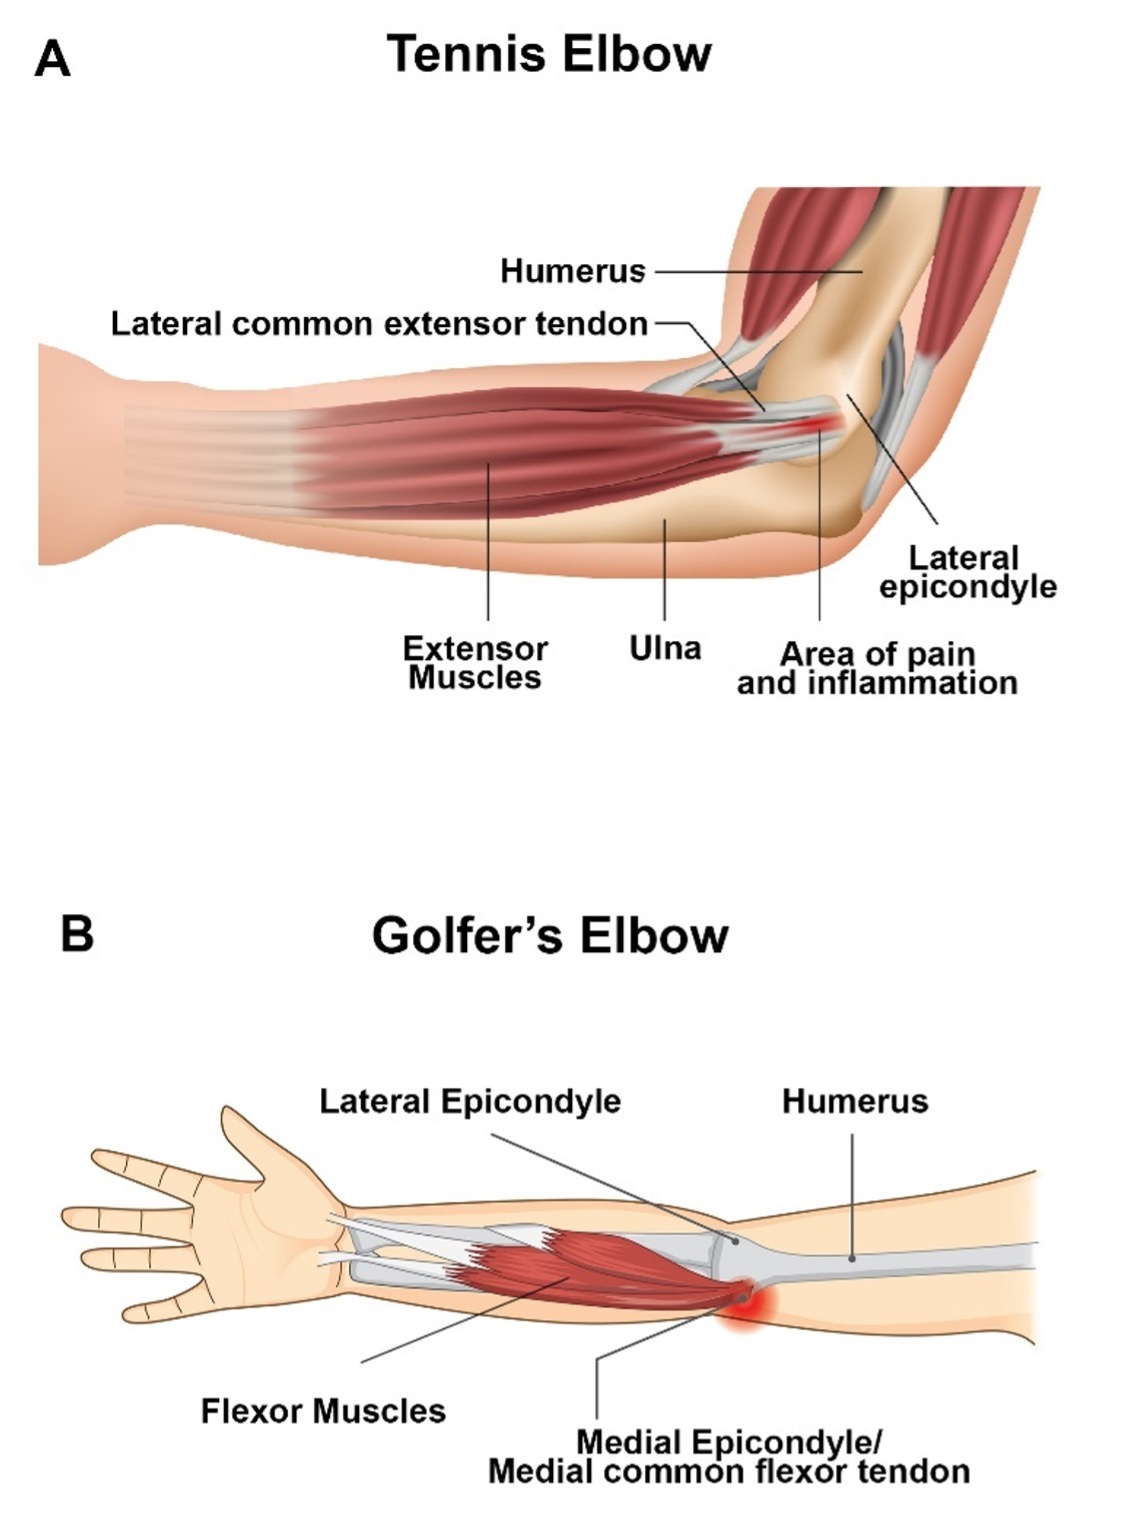 pathophysiology-of-tennis-elbow-and-golfer’s-elbow